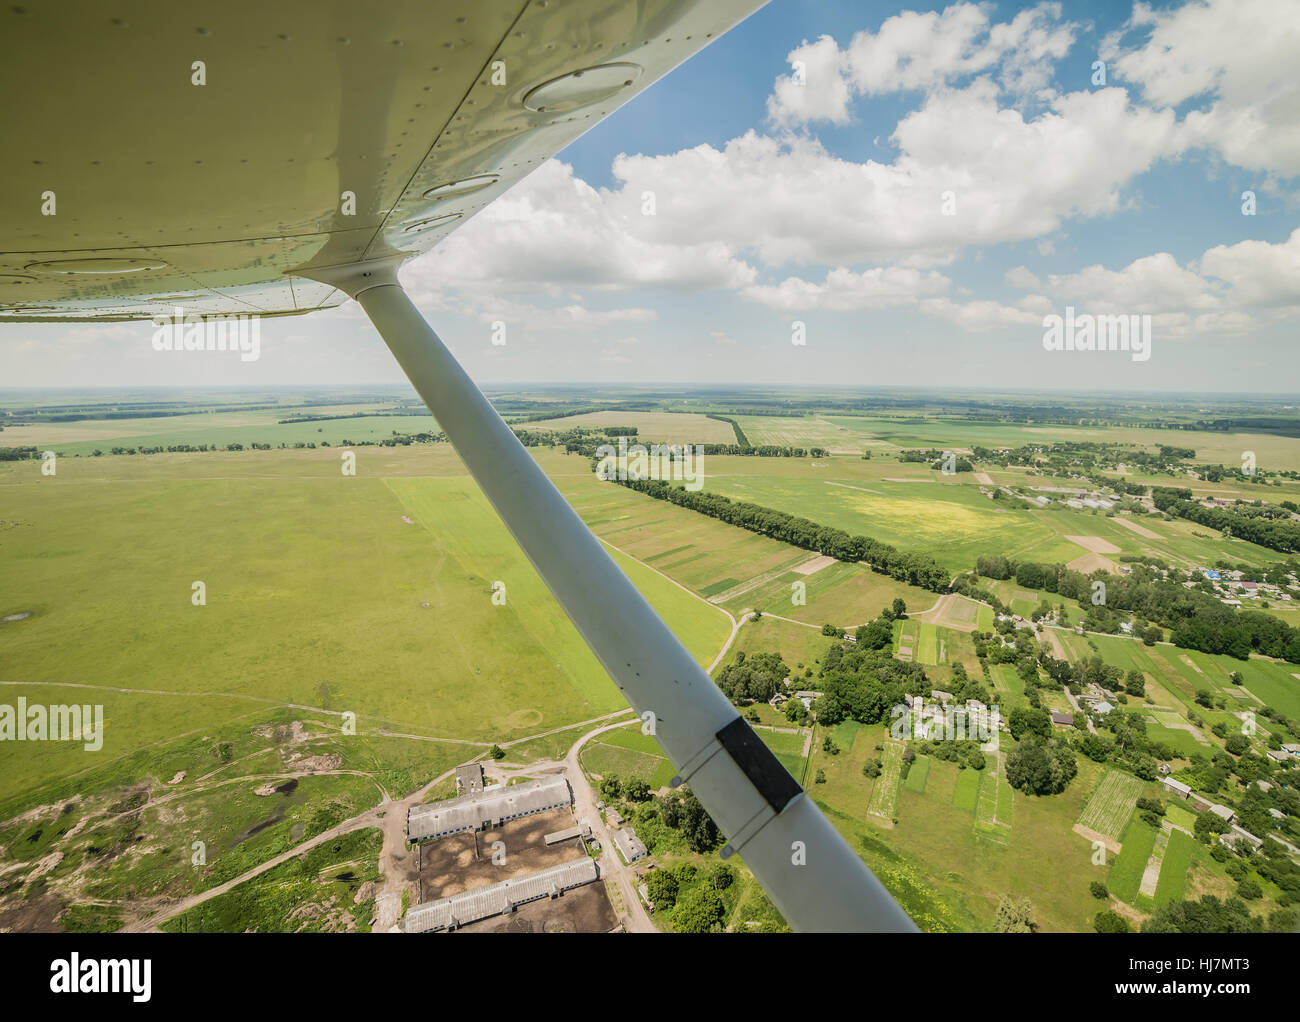 View from the pilot's seat of a small light plane while flying over the rural area Stock Photo